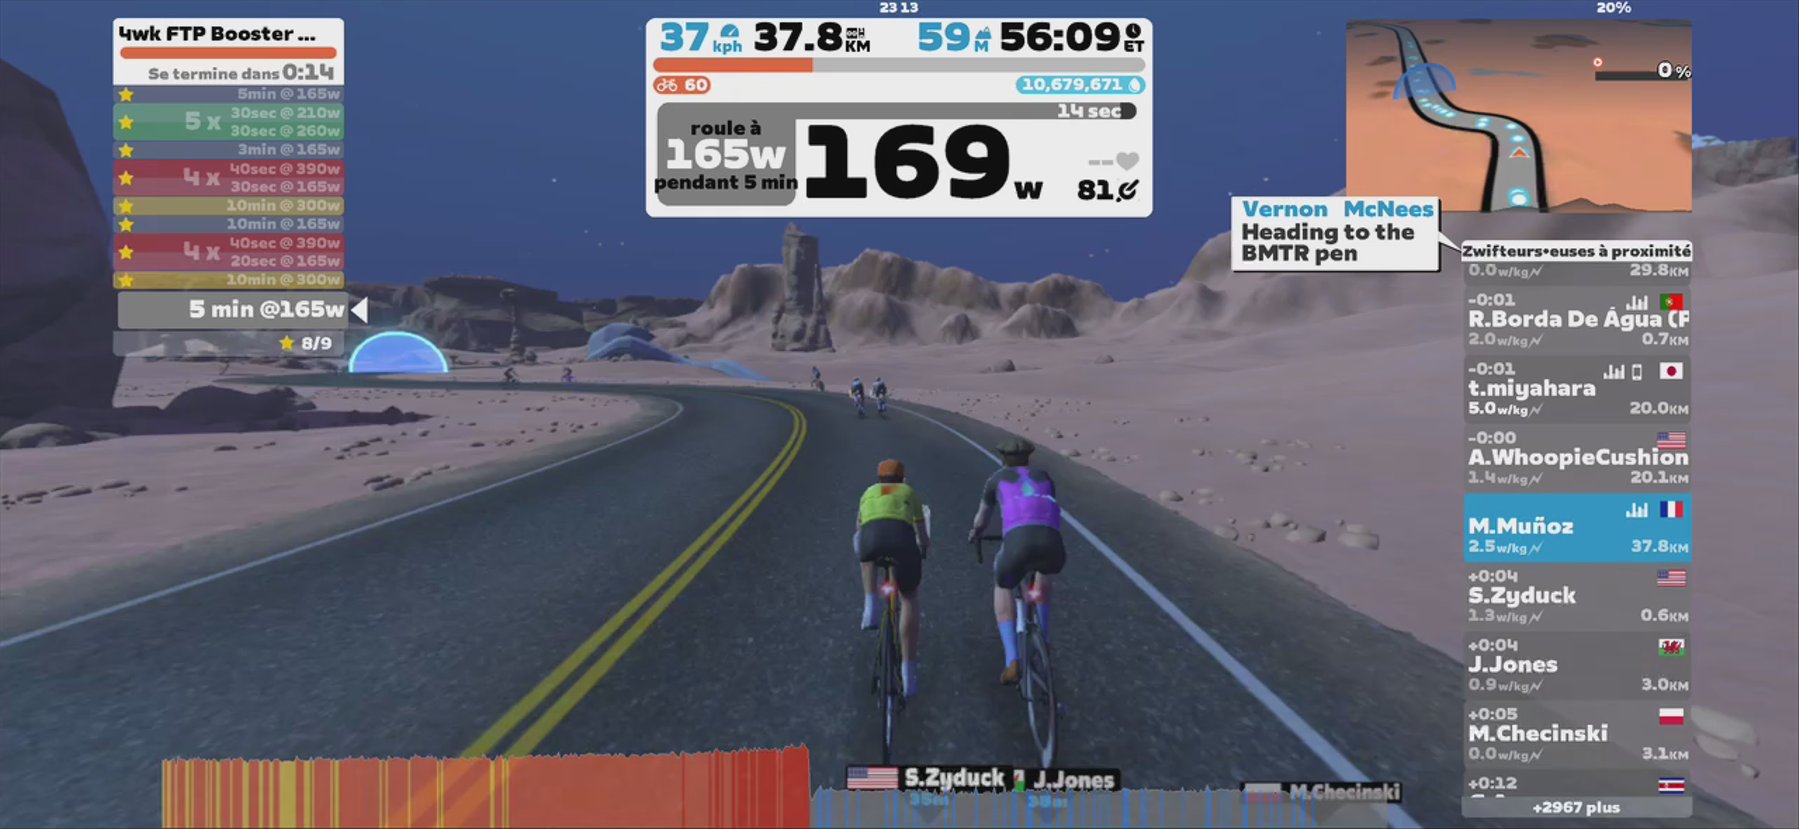 Zwift - 4wk FTP Booster S3#4 in Watopia